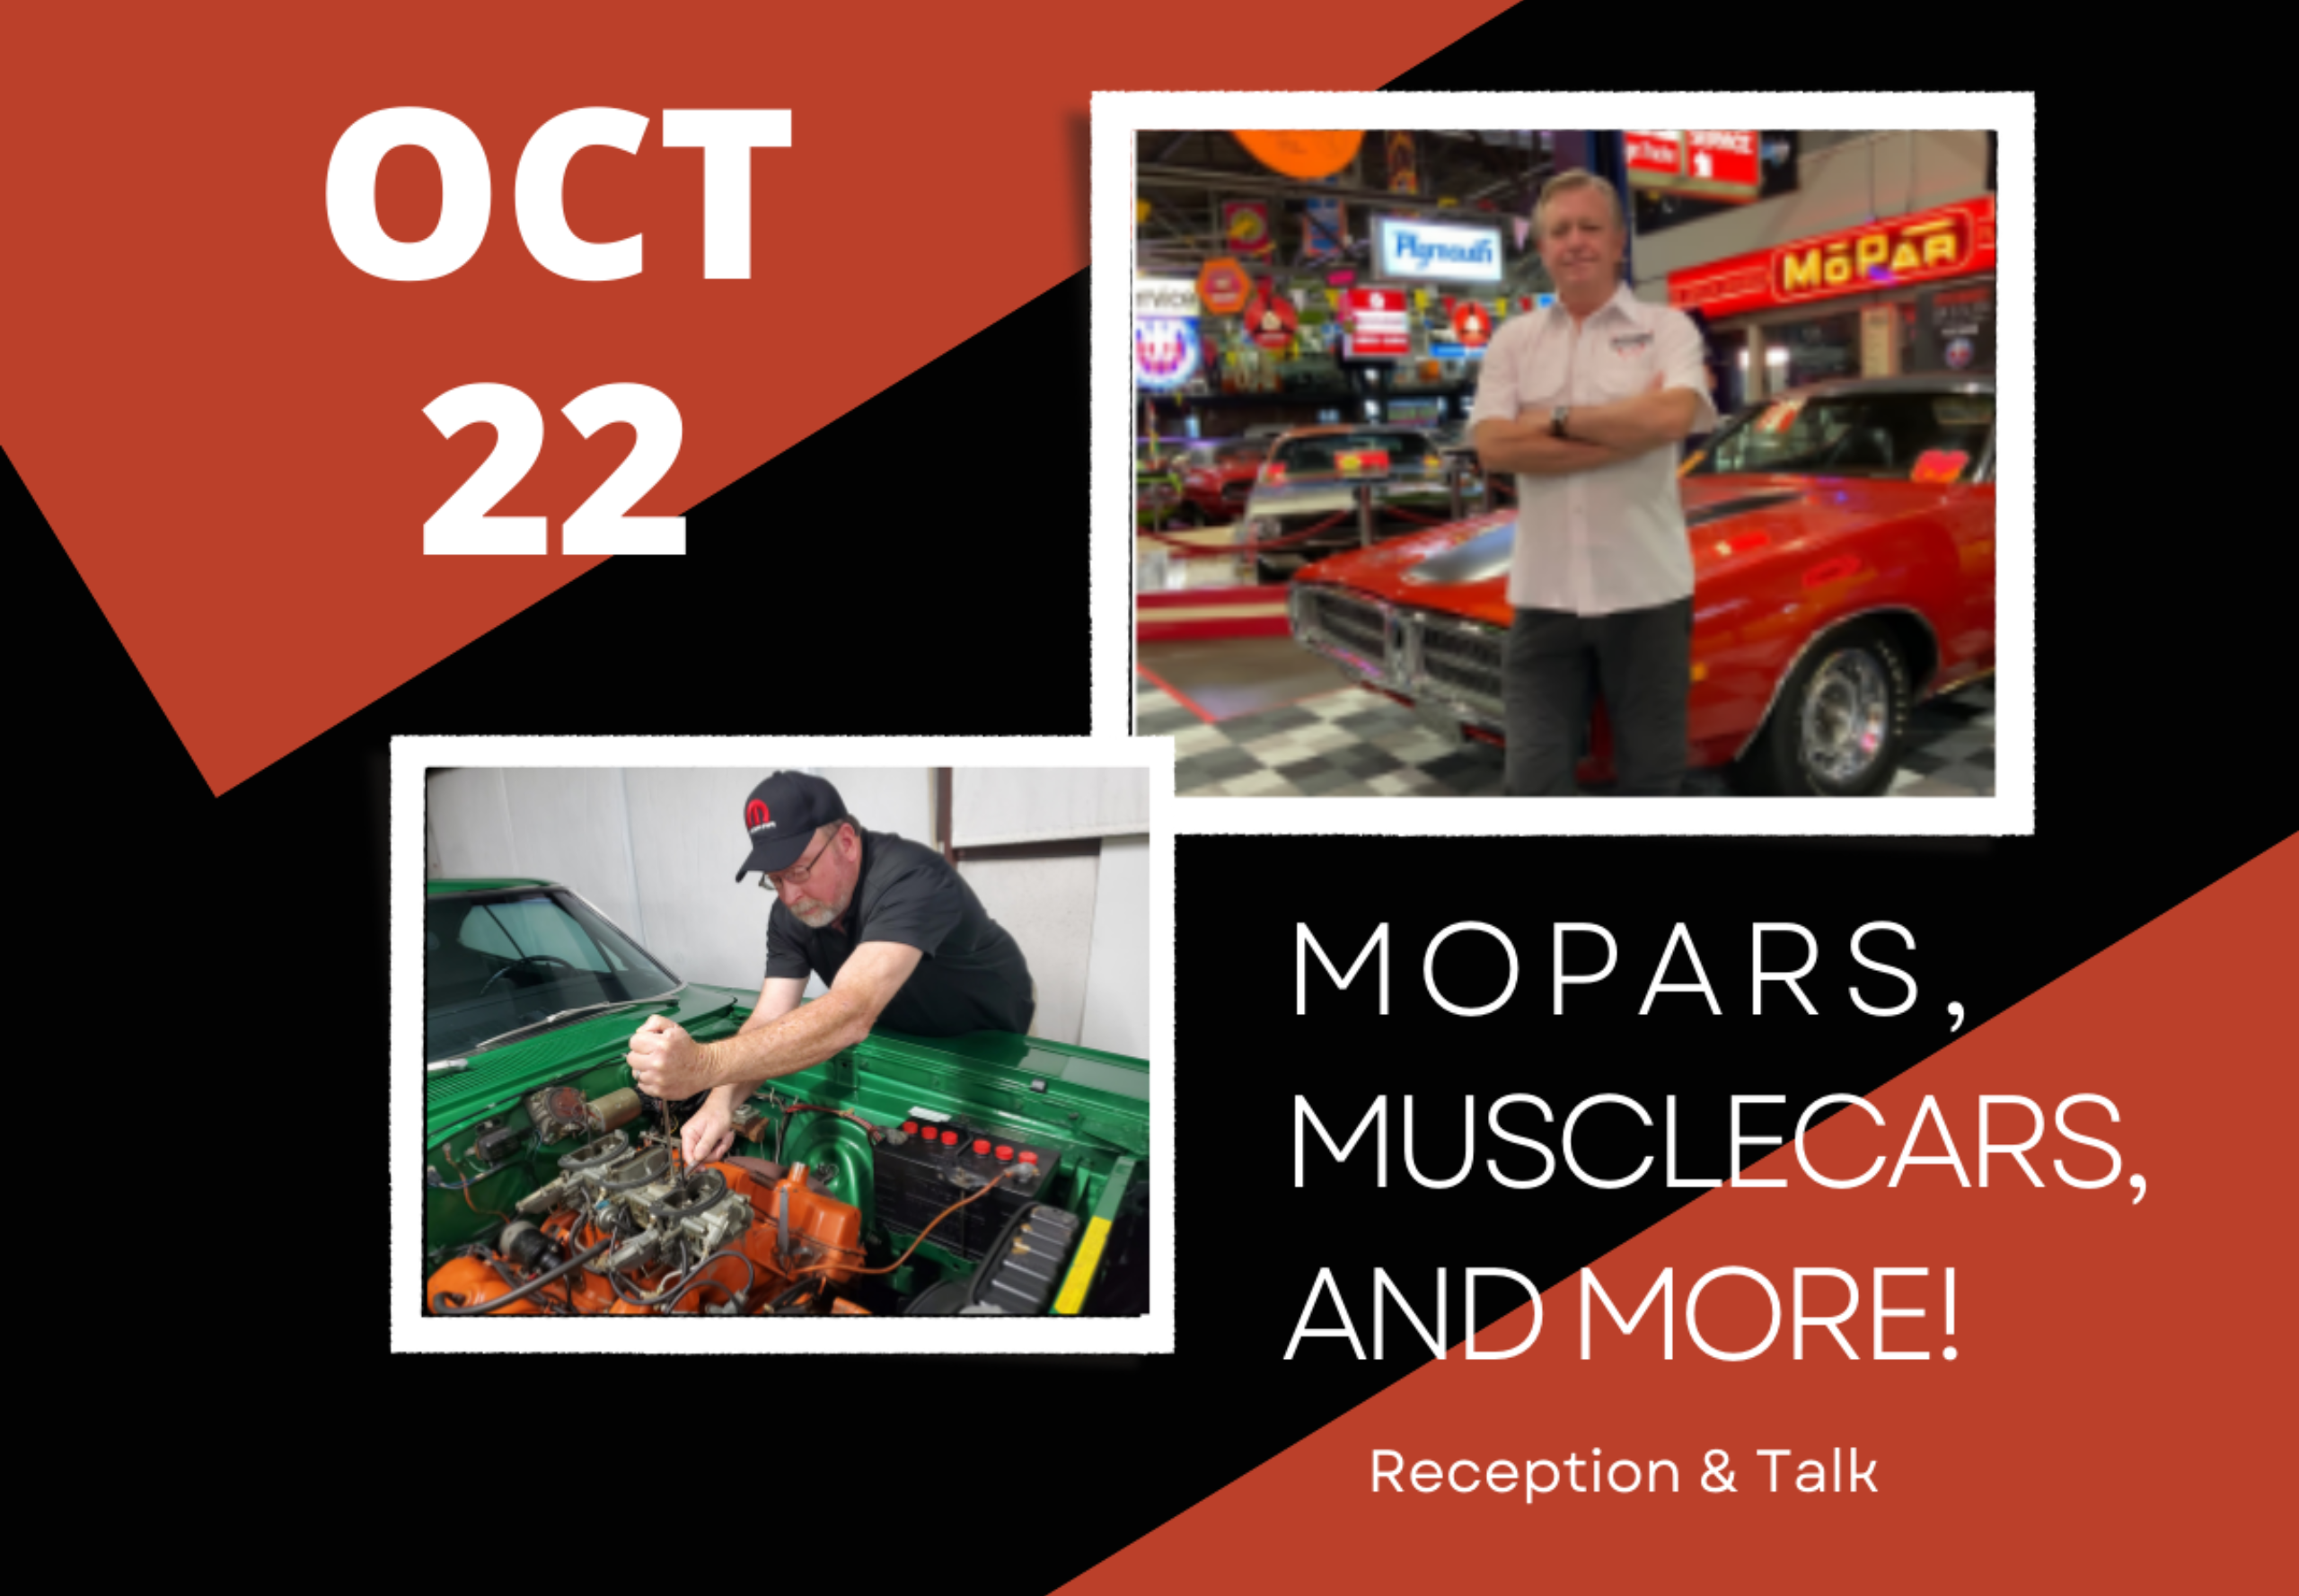 Mopars, Musclecars, and More!